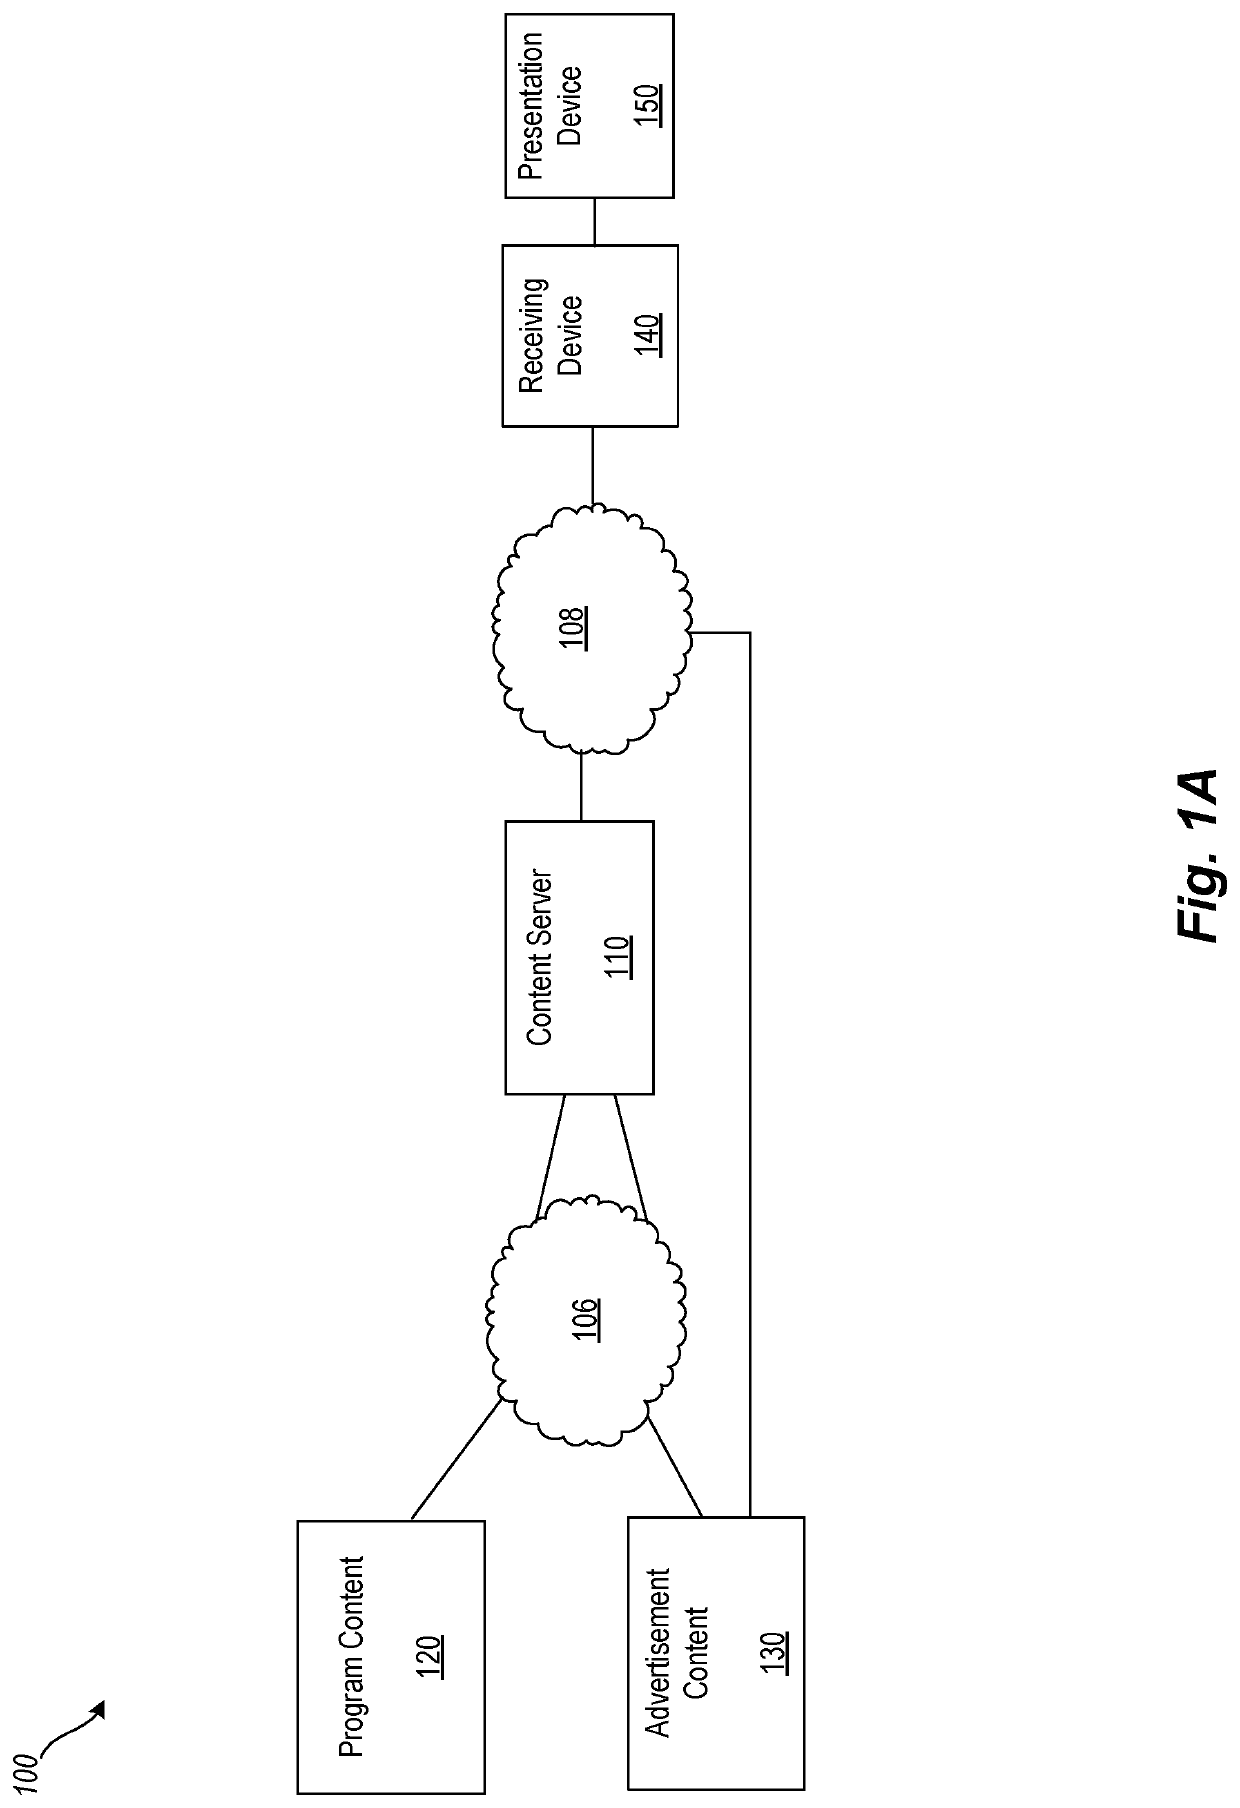 Systems and methods for targeted advertisement insertion into a program content stream